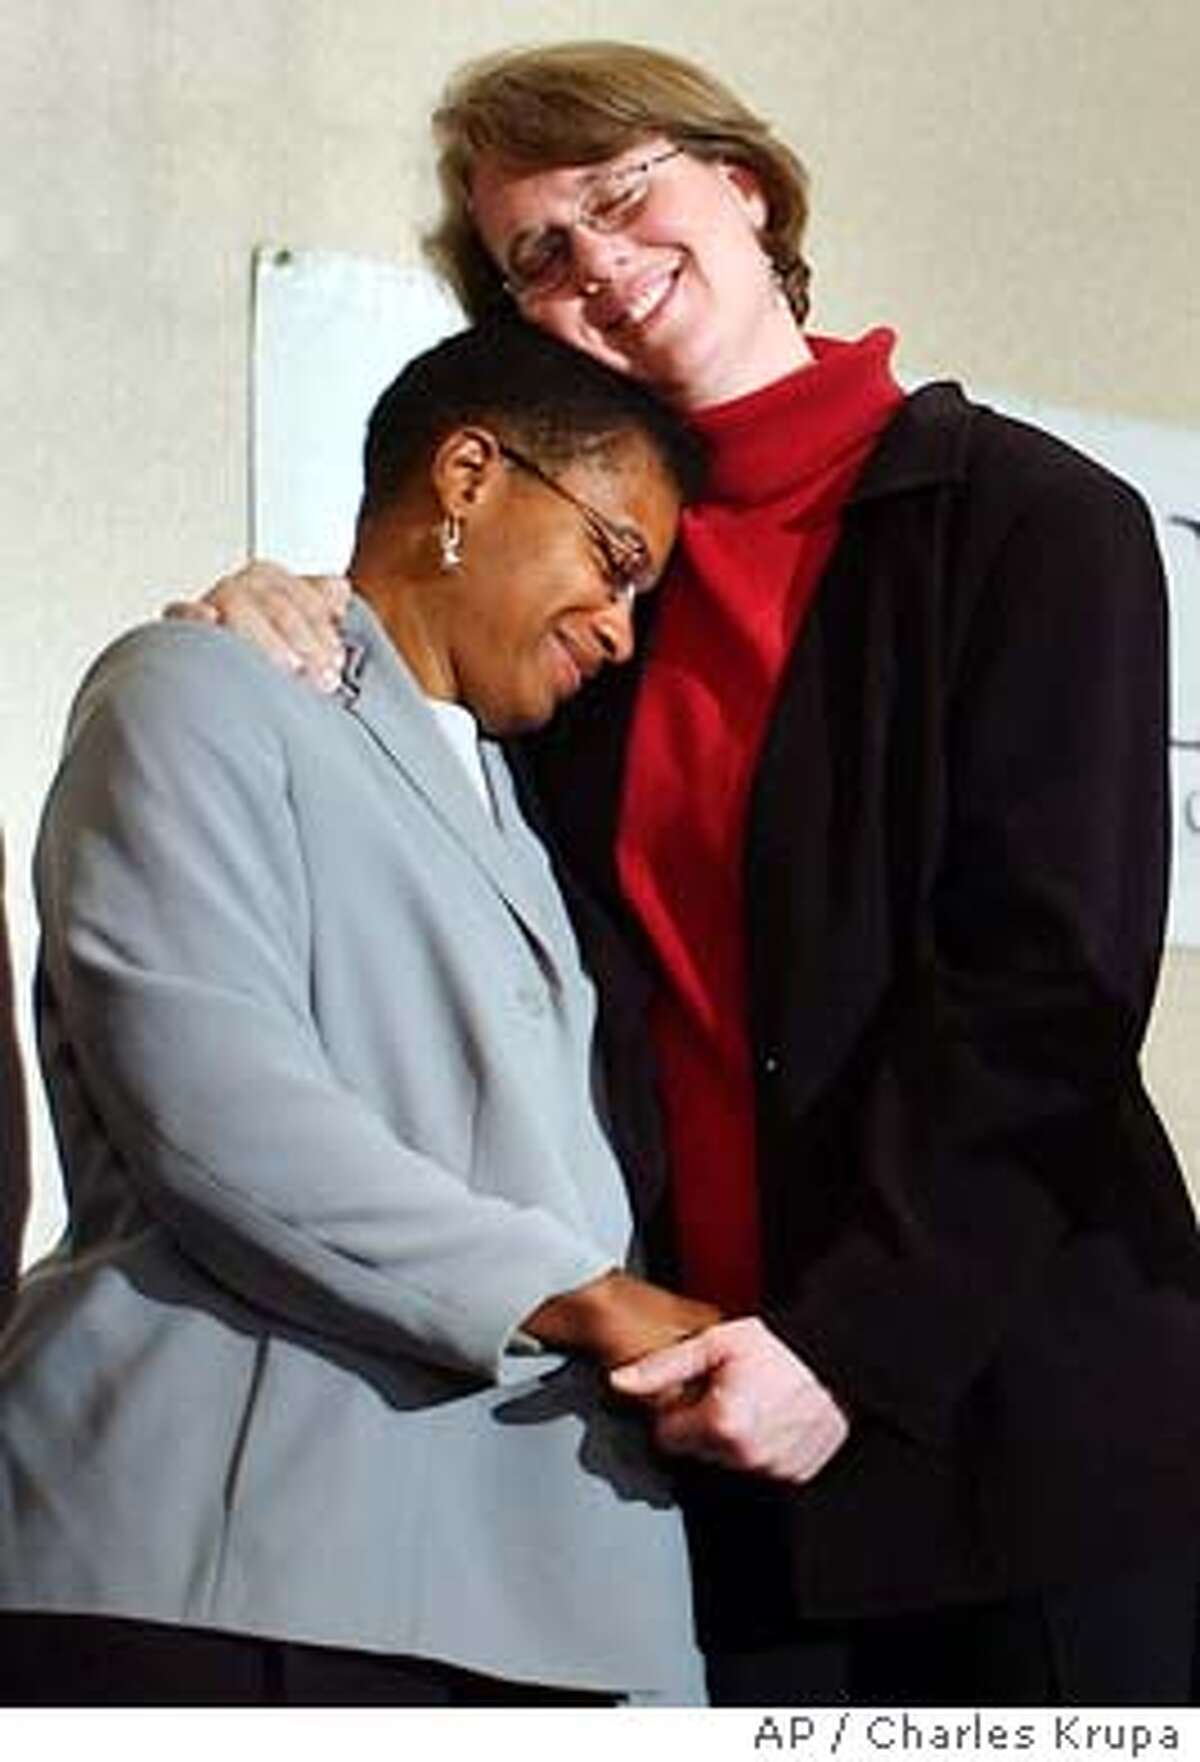 Heidi Norton, right, rests her head on her partner Gina Smith, both of Northampton, Mass., during a news conference regarding the Massachusetts Supreme Judicial Court's ruling that same-sex couples are legally entitled to wed under the state constitution in Boston, Tuesday Nov. 18, 2003. (AP Photo/Charles Krupa)